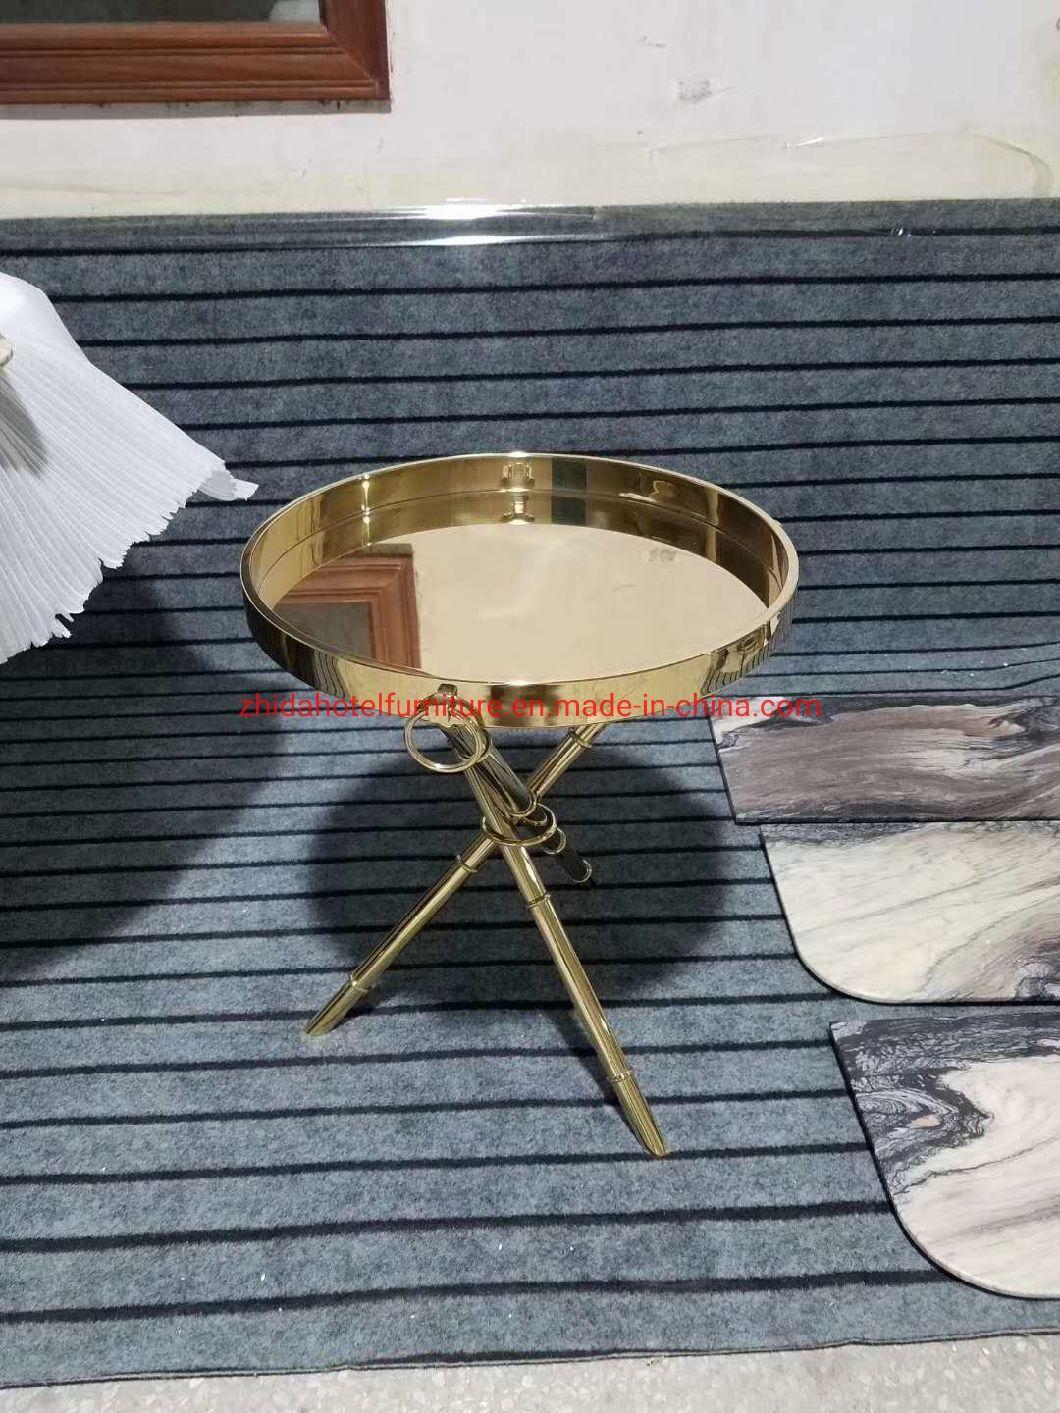 Metal Round Rectangular Marble Table Top Coffee Side Table for Living Room Sofa